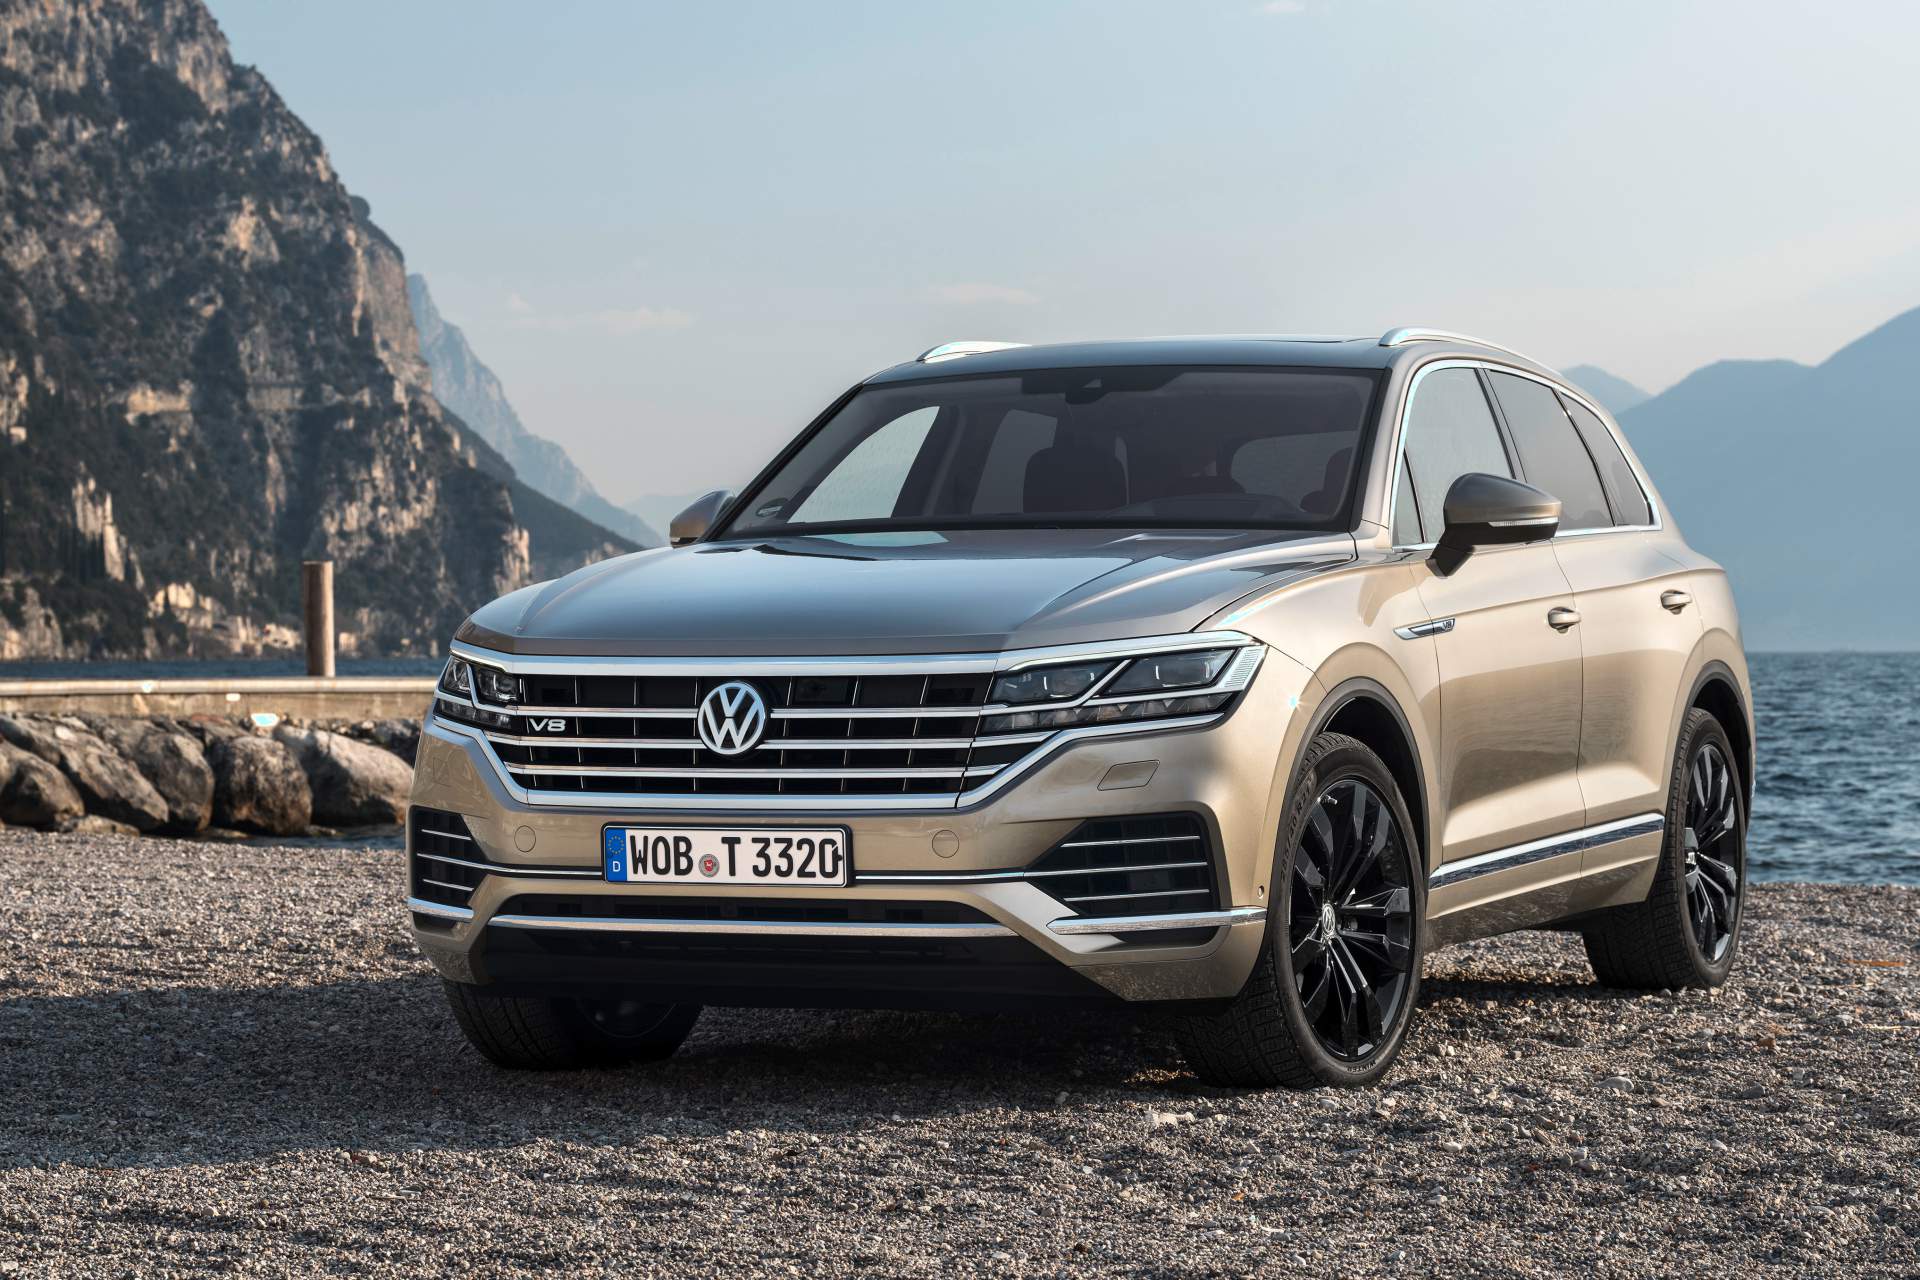 Volkswagen Touareg Gains 4.0 V8 TDI Just In Time For 2019